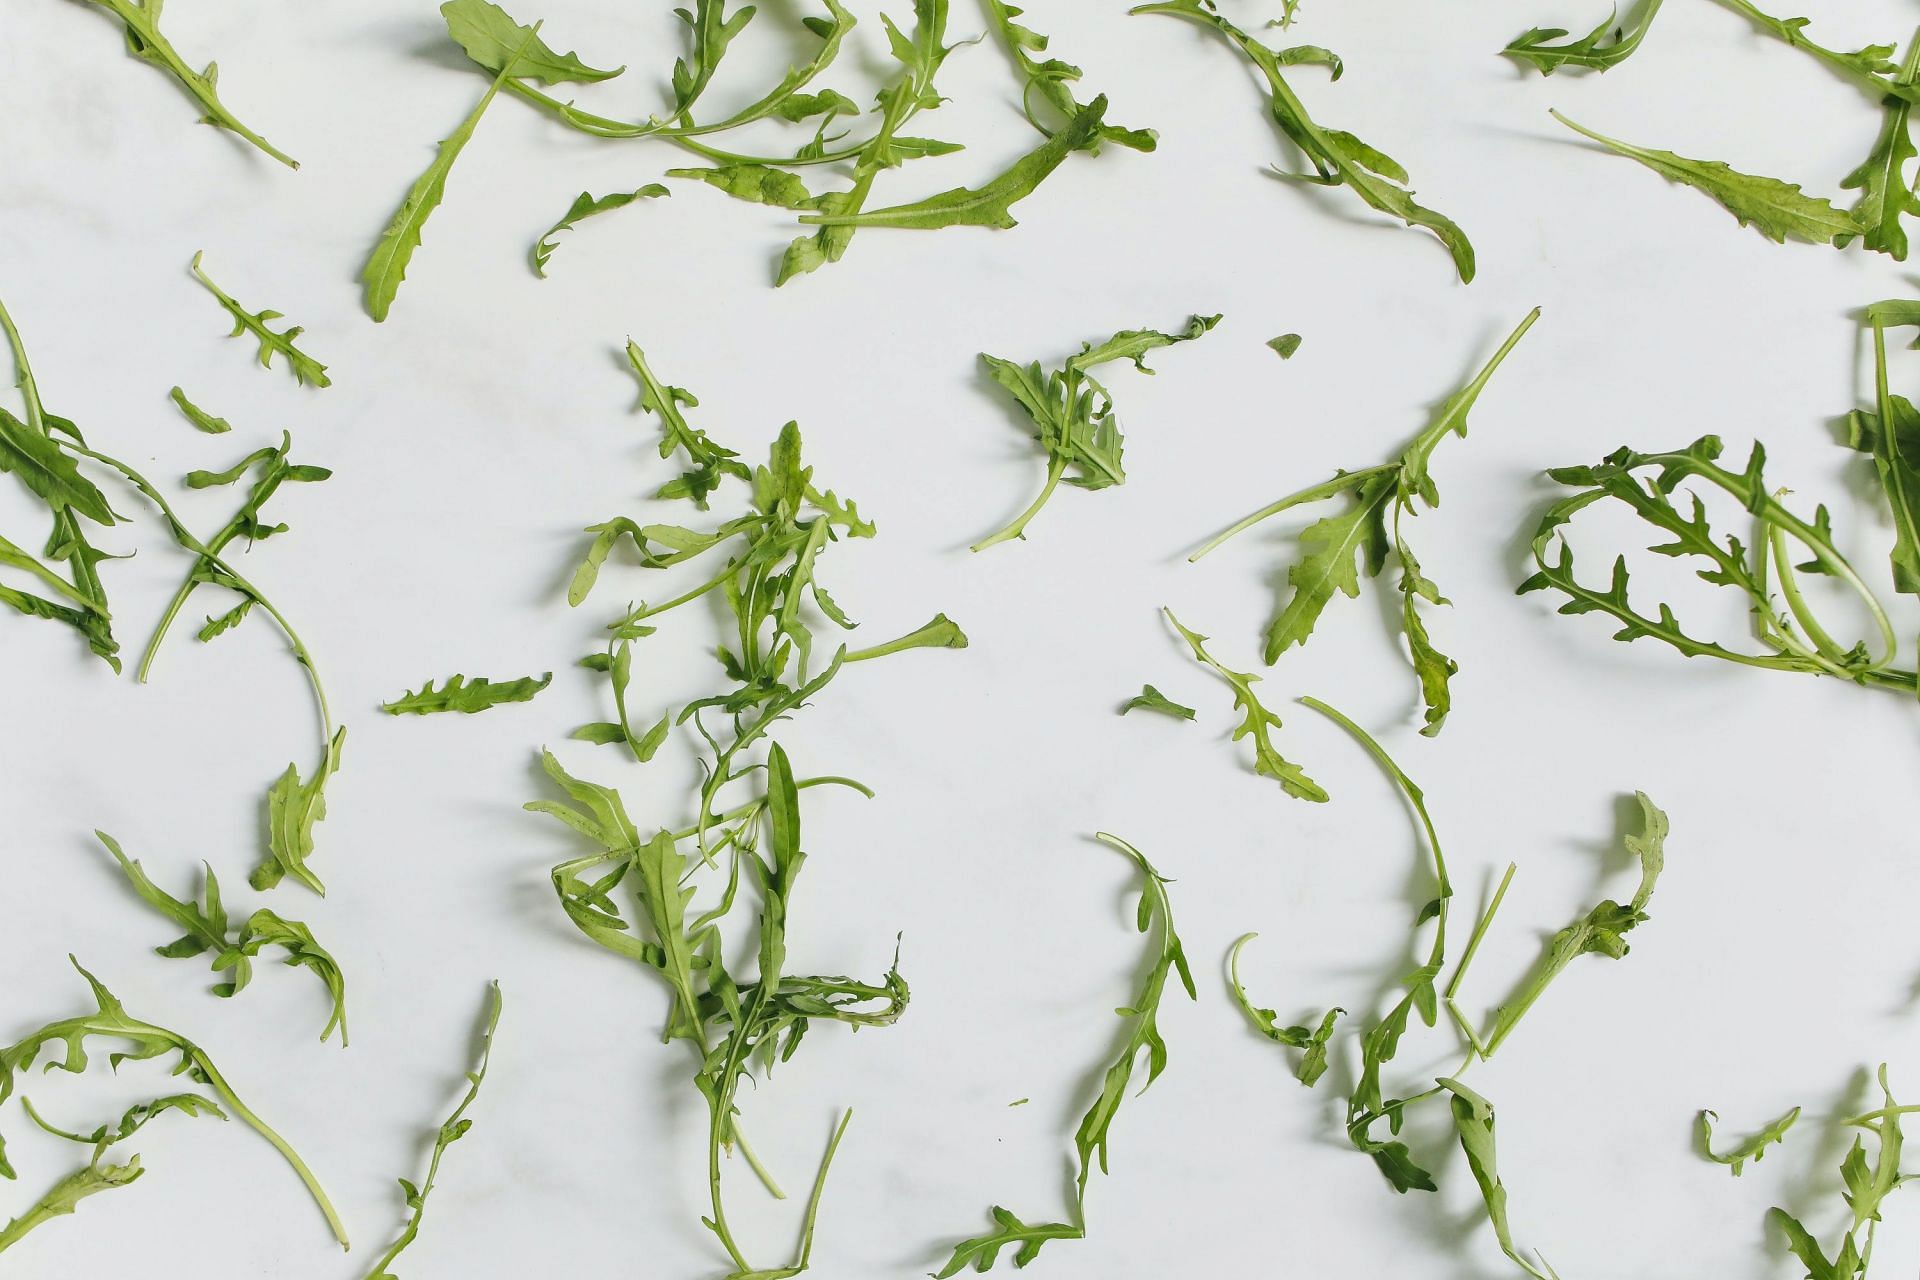 Everything you need to know about nutrition in arugula. (Image via Pexels / Polina Tankilevitch)